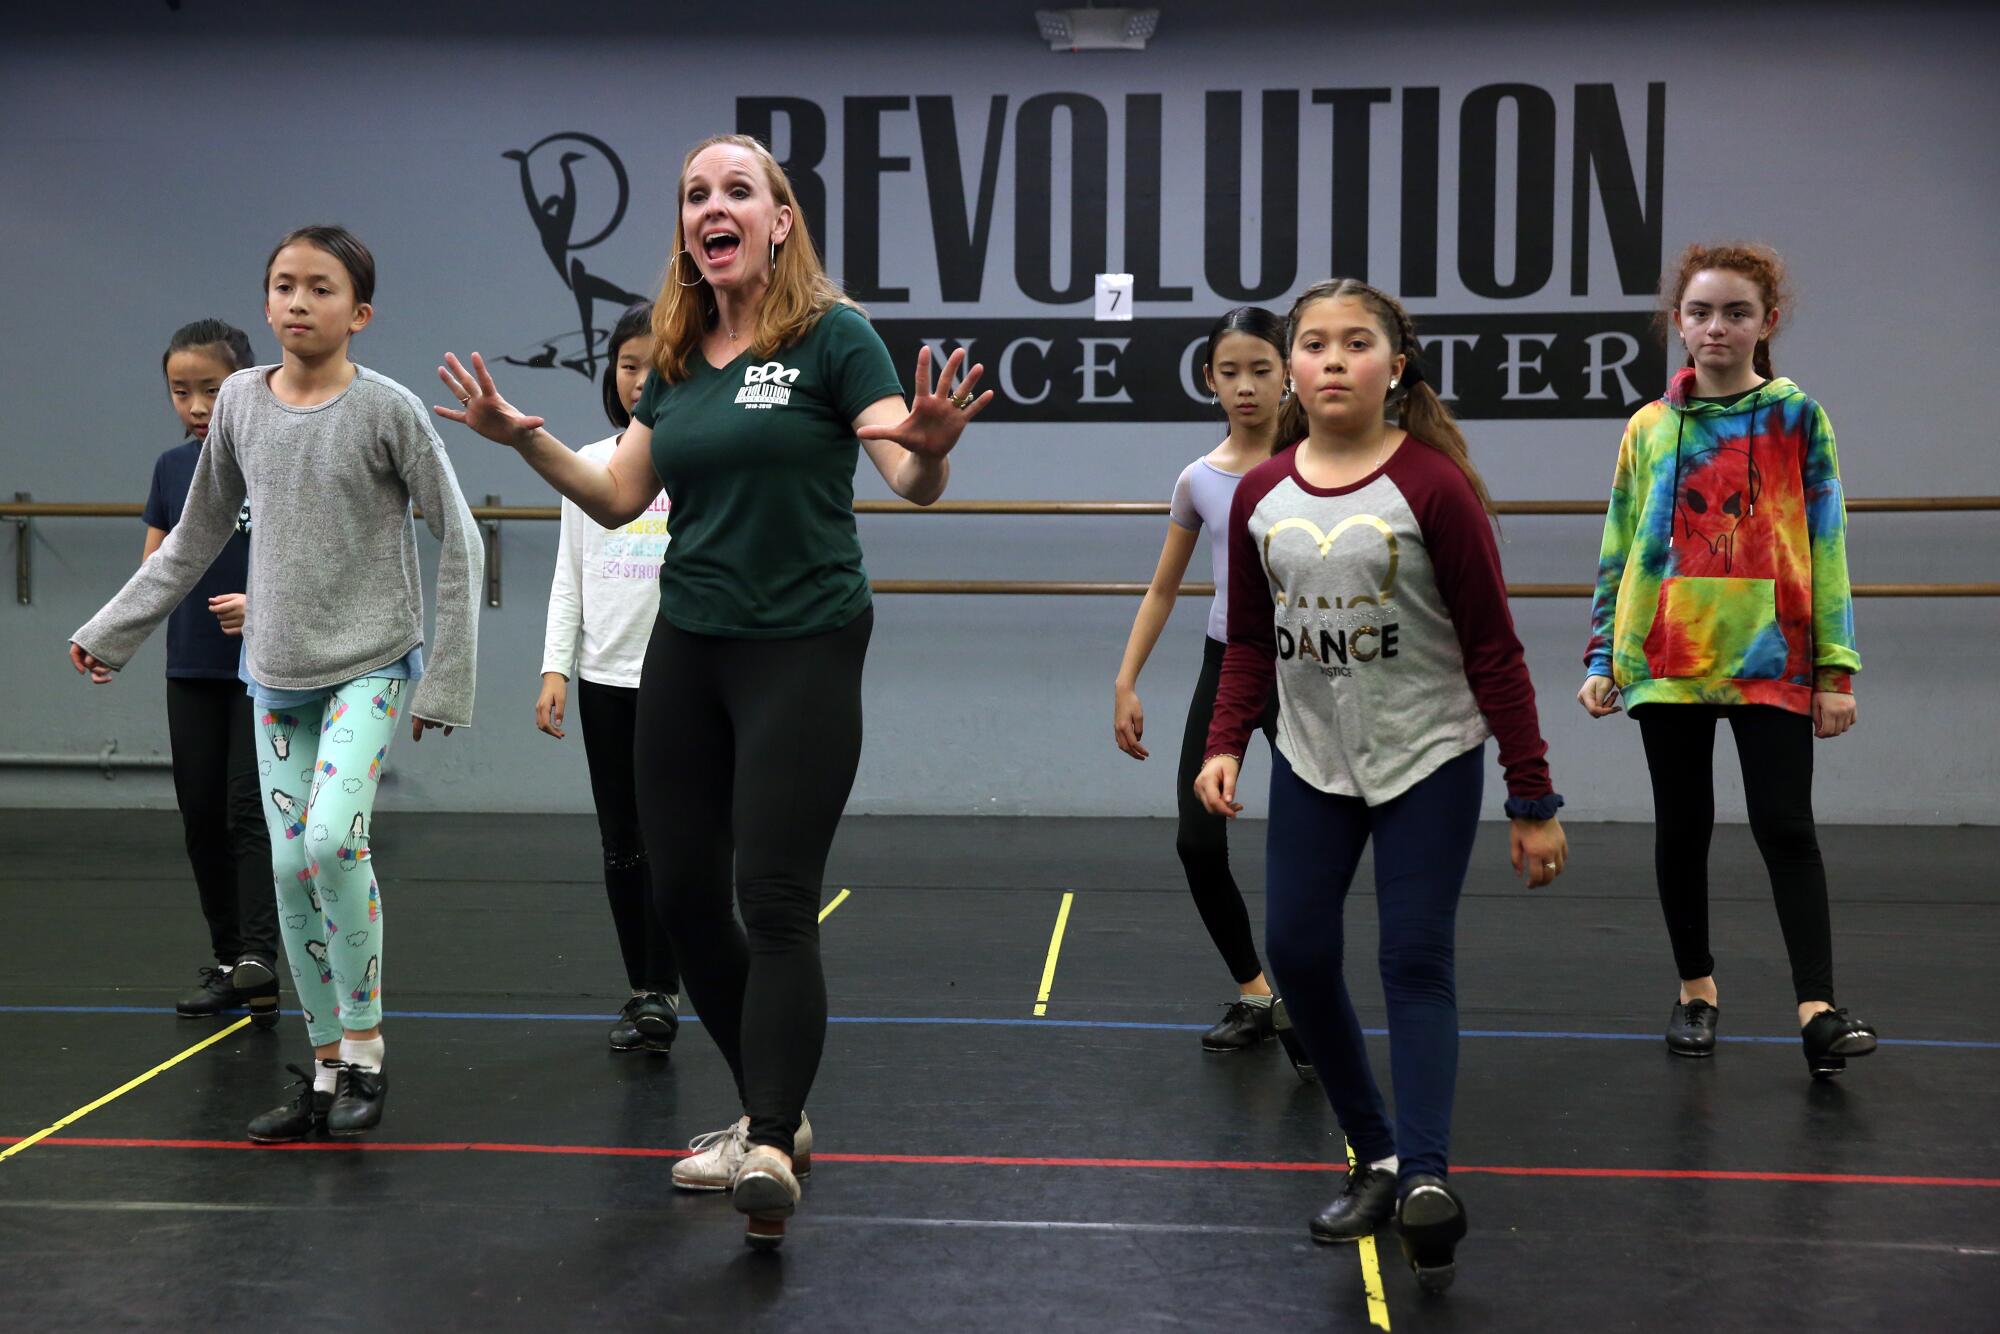 Julie Kay Stallcup leading a group of kids in a tap dance lesson.